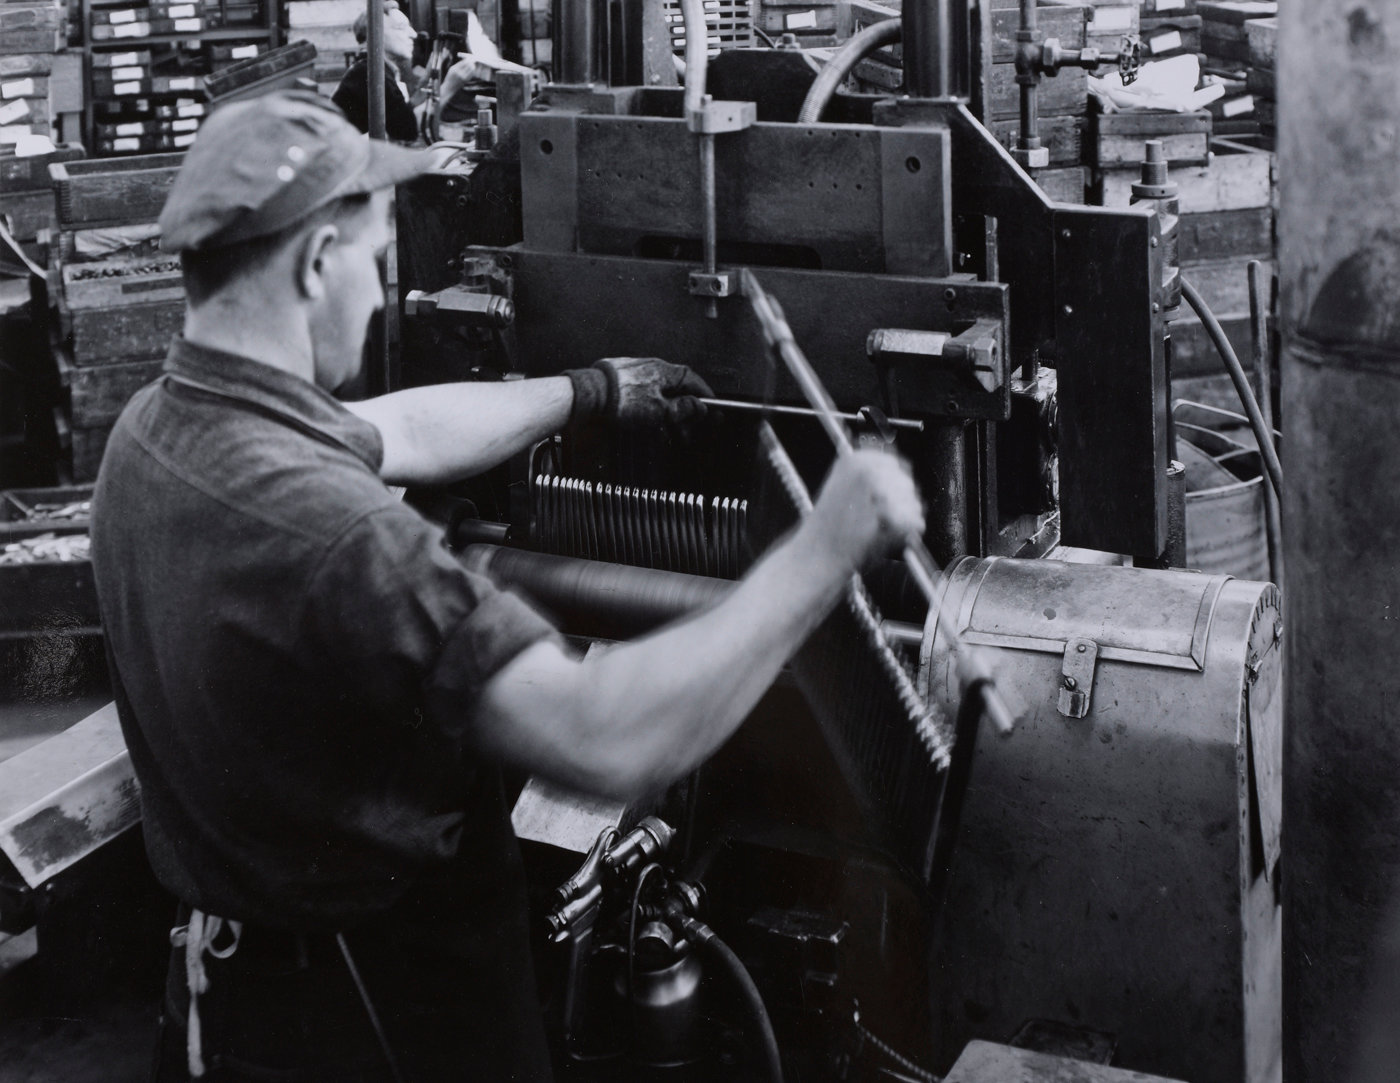 An Oneida Limited employee buffs a rack of knives. Estimated date of photo is 1950s.